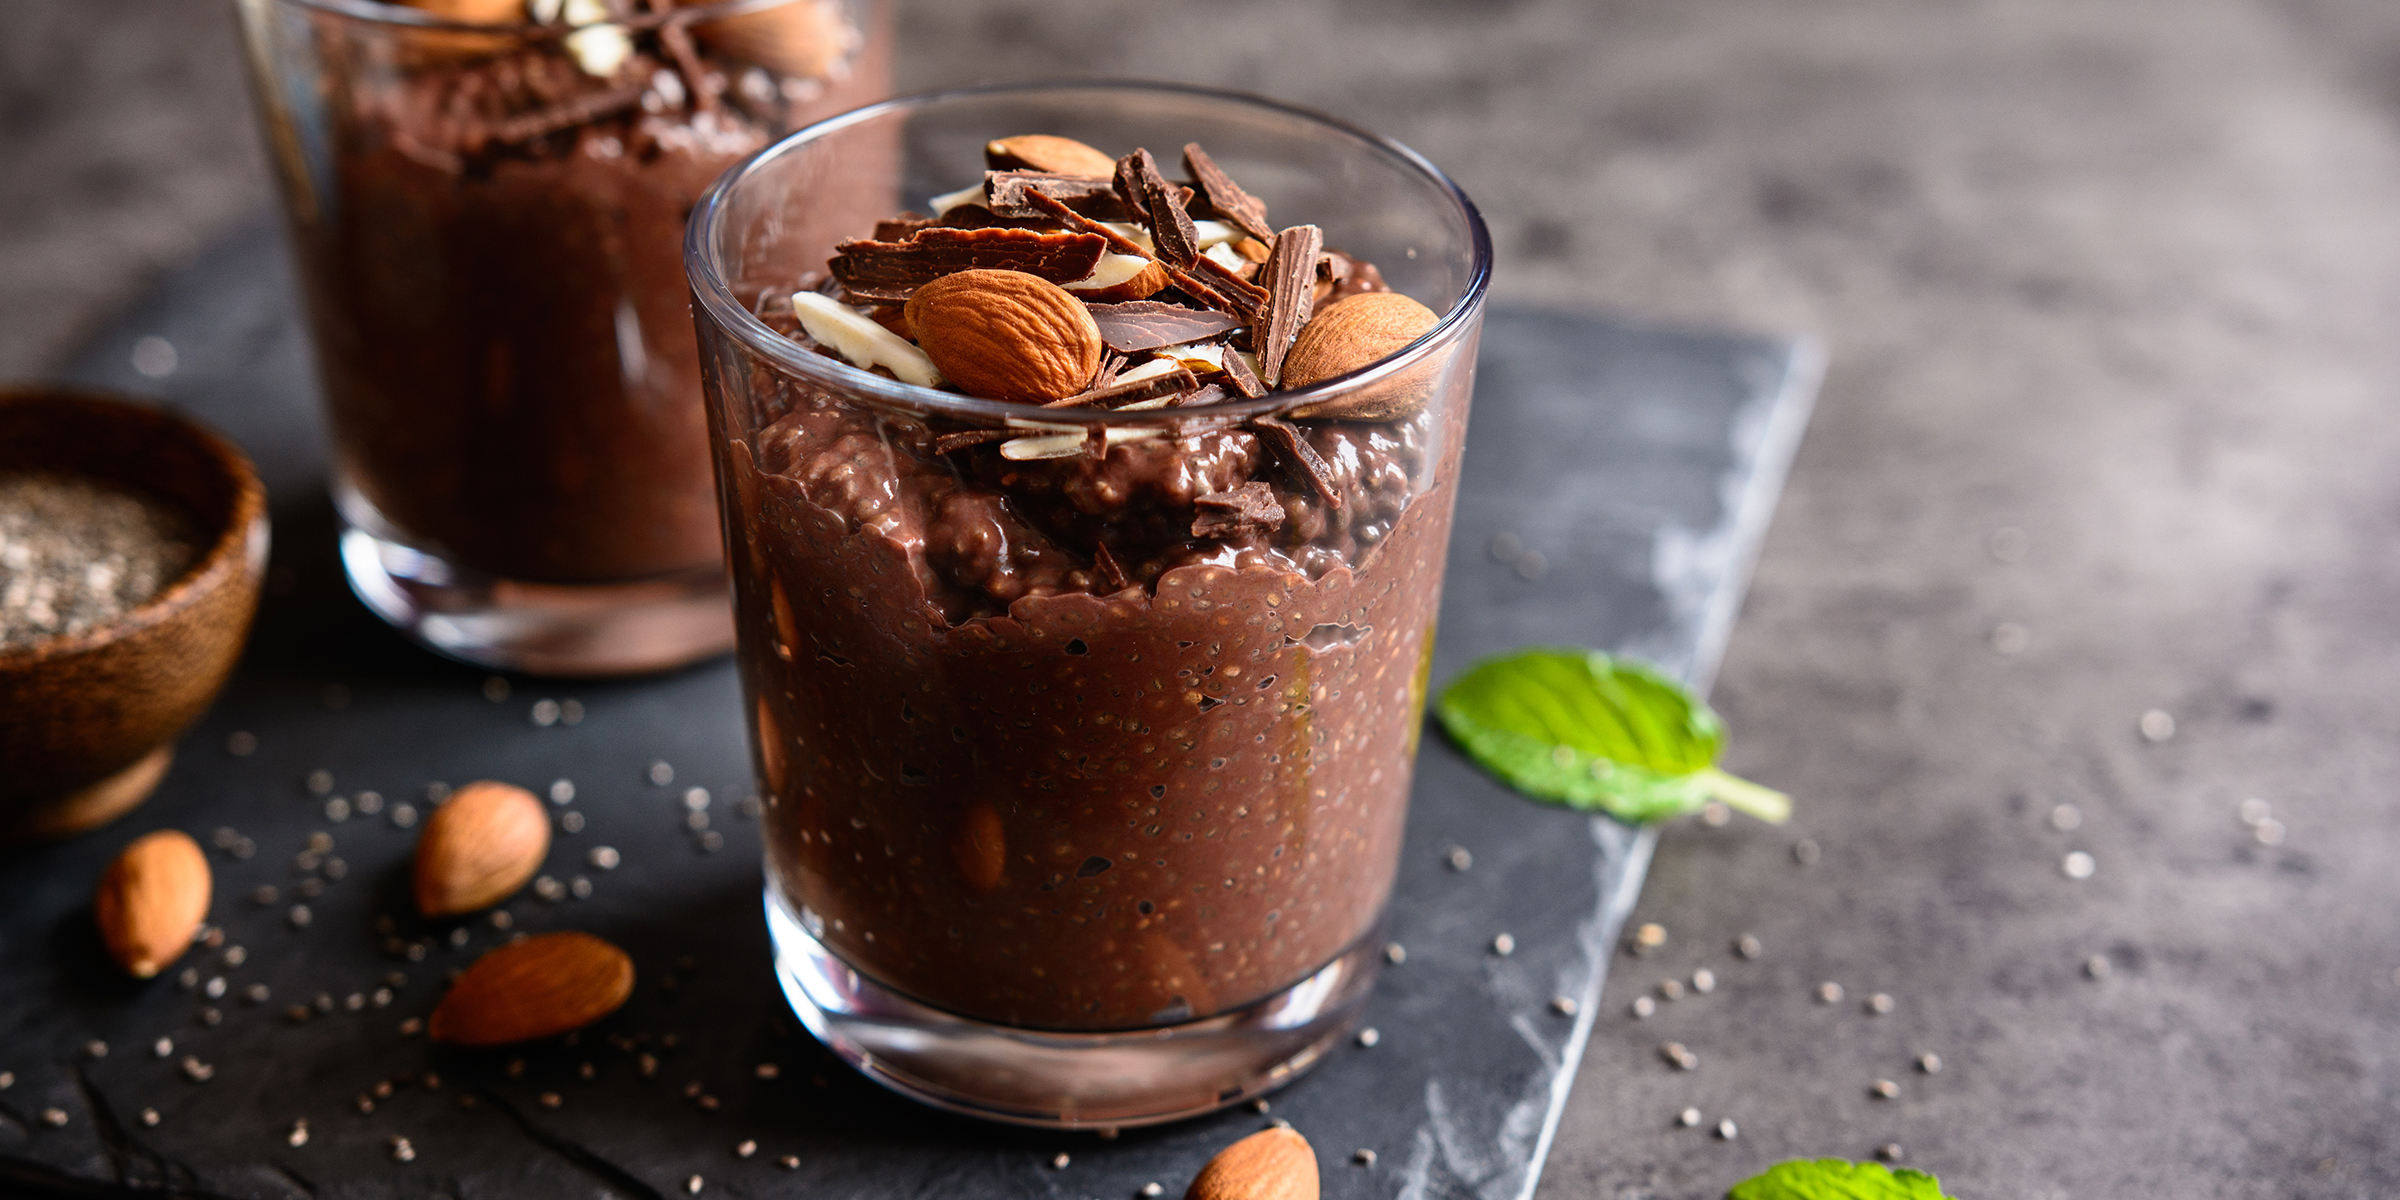 Chocolate protein pudding with chia seeds and almonds | Source: Shutterstock